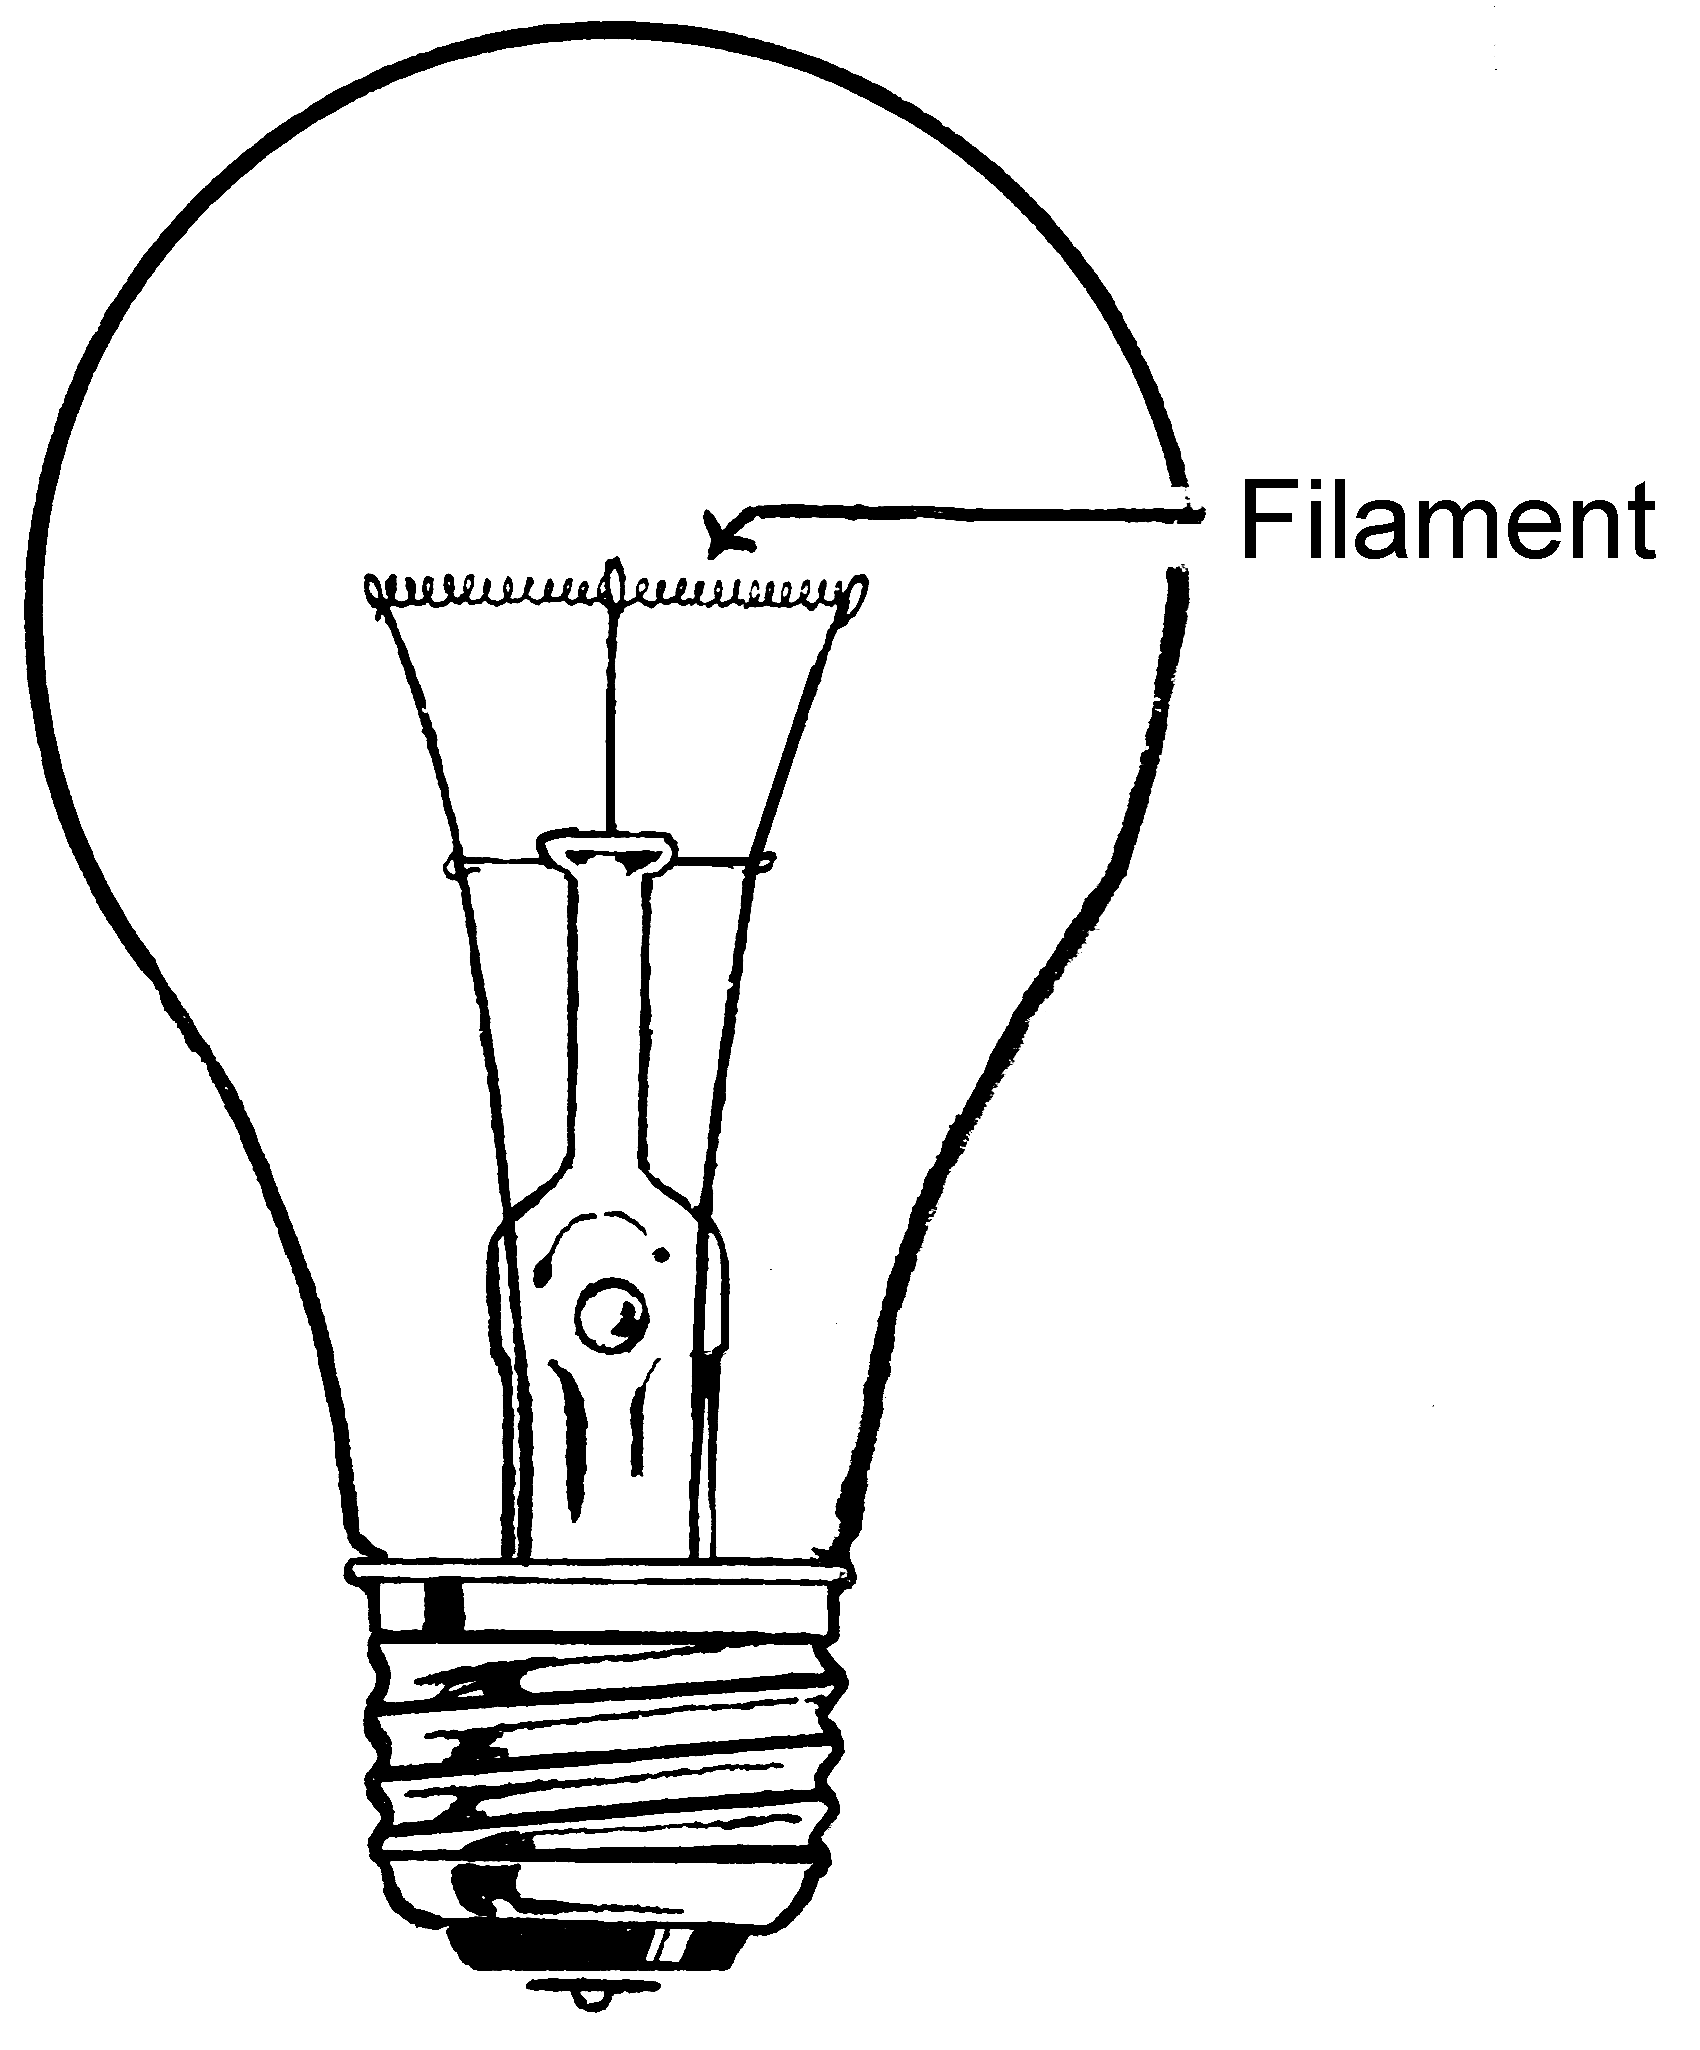 File:Filament (PSF).png - Wikimedia Commons